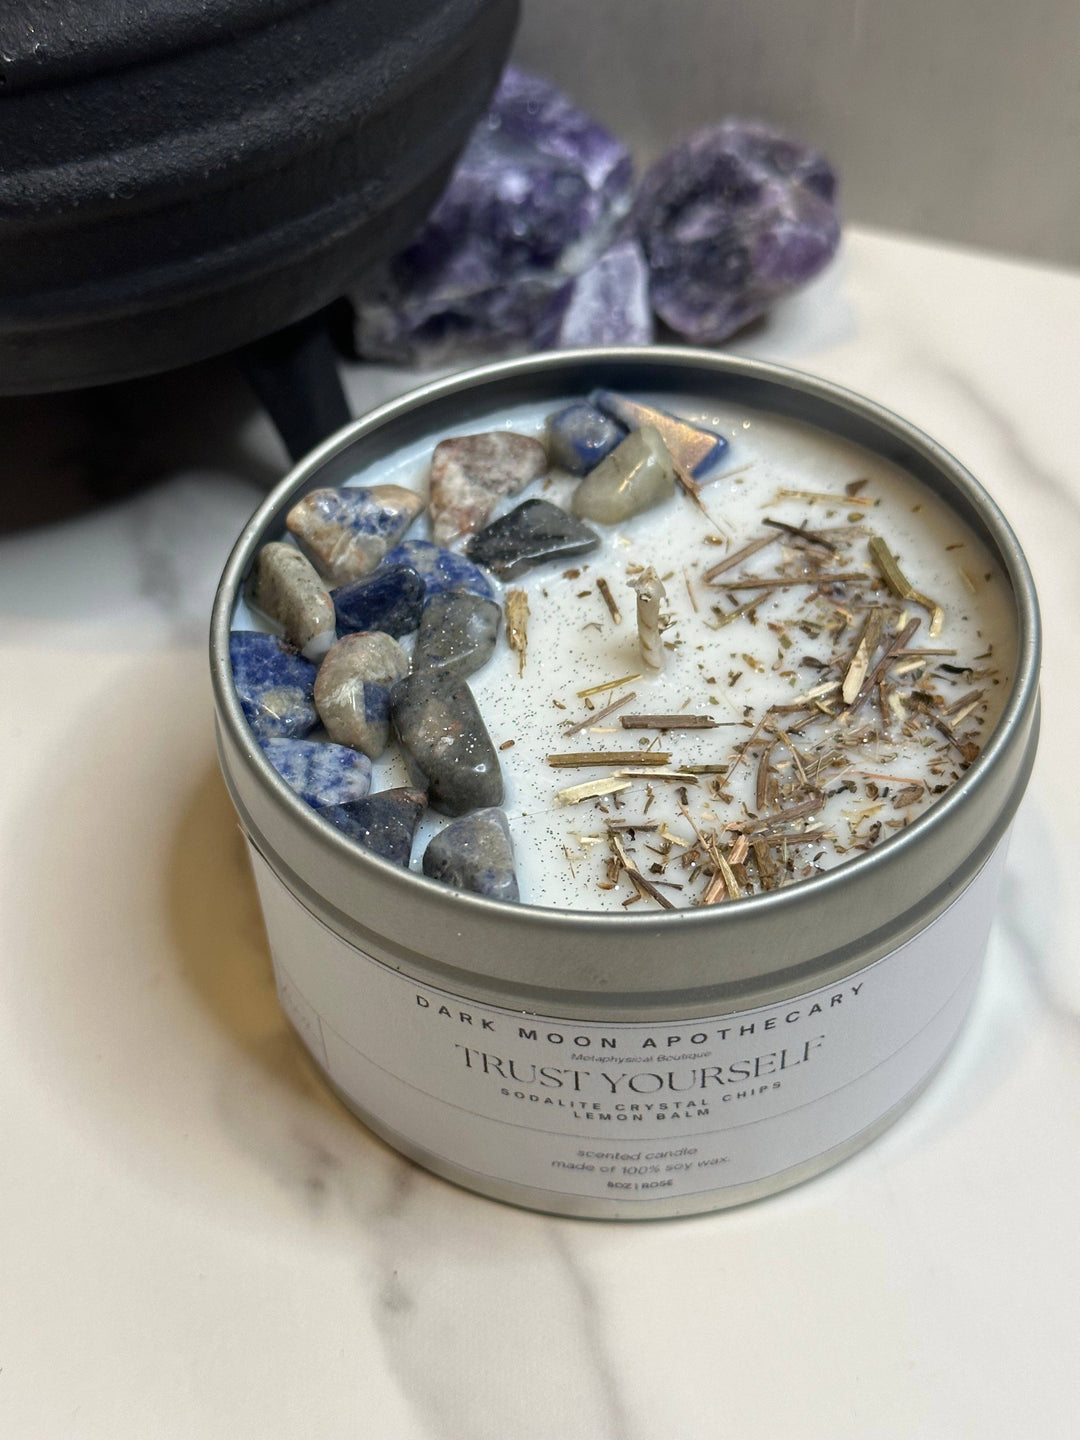 The Dark Moon Apothecary - Trust Yourself Soy Crystal Candle